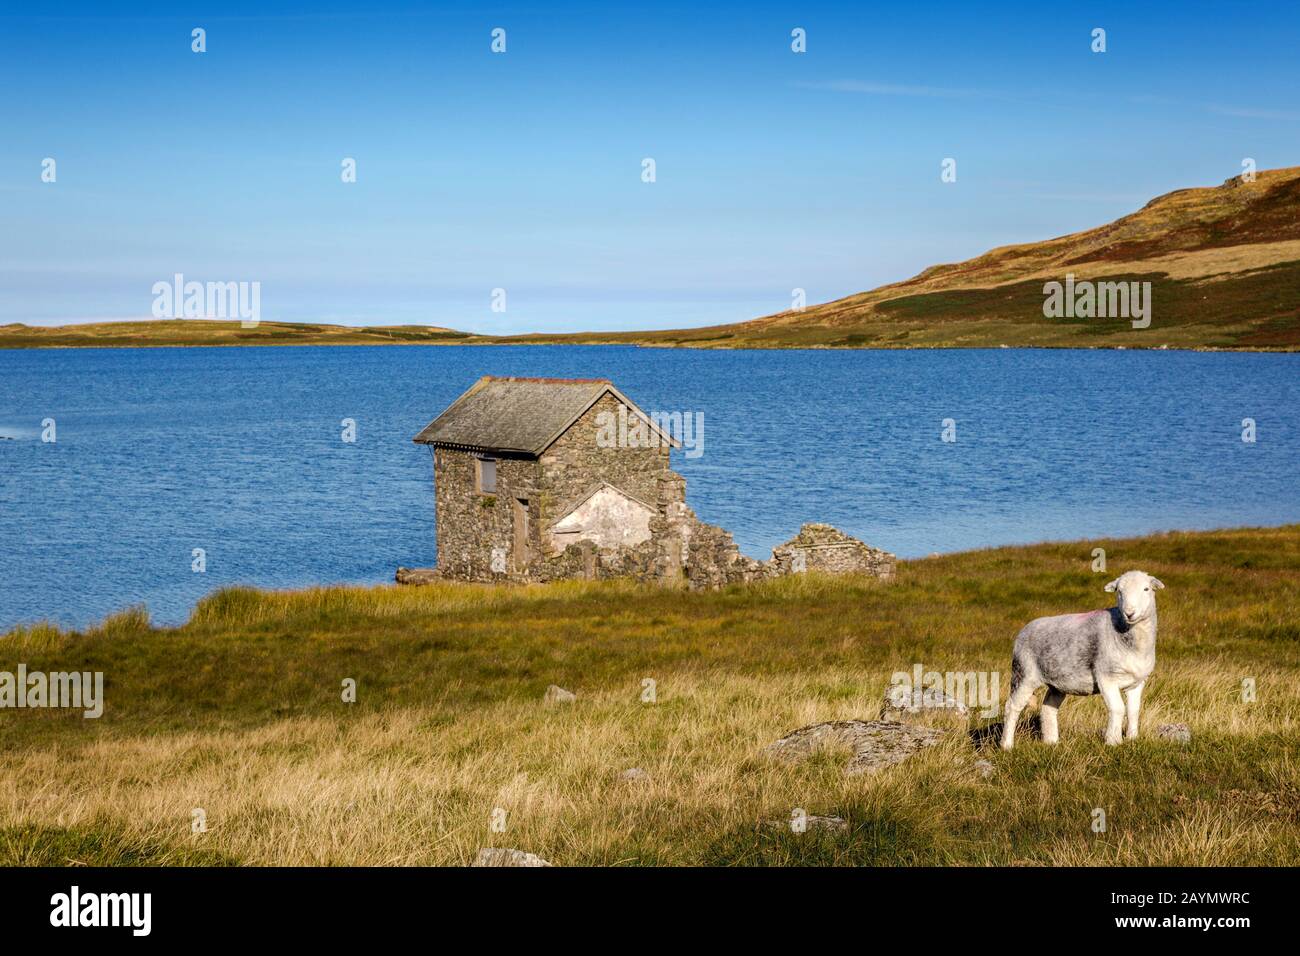 A sheep standing near the old stone boathouse on the shores of Devoke Water, Lake District National Park, Cumbria, England, Uk Stock Photo